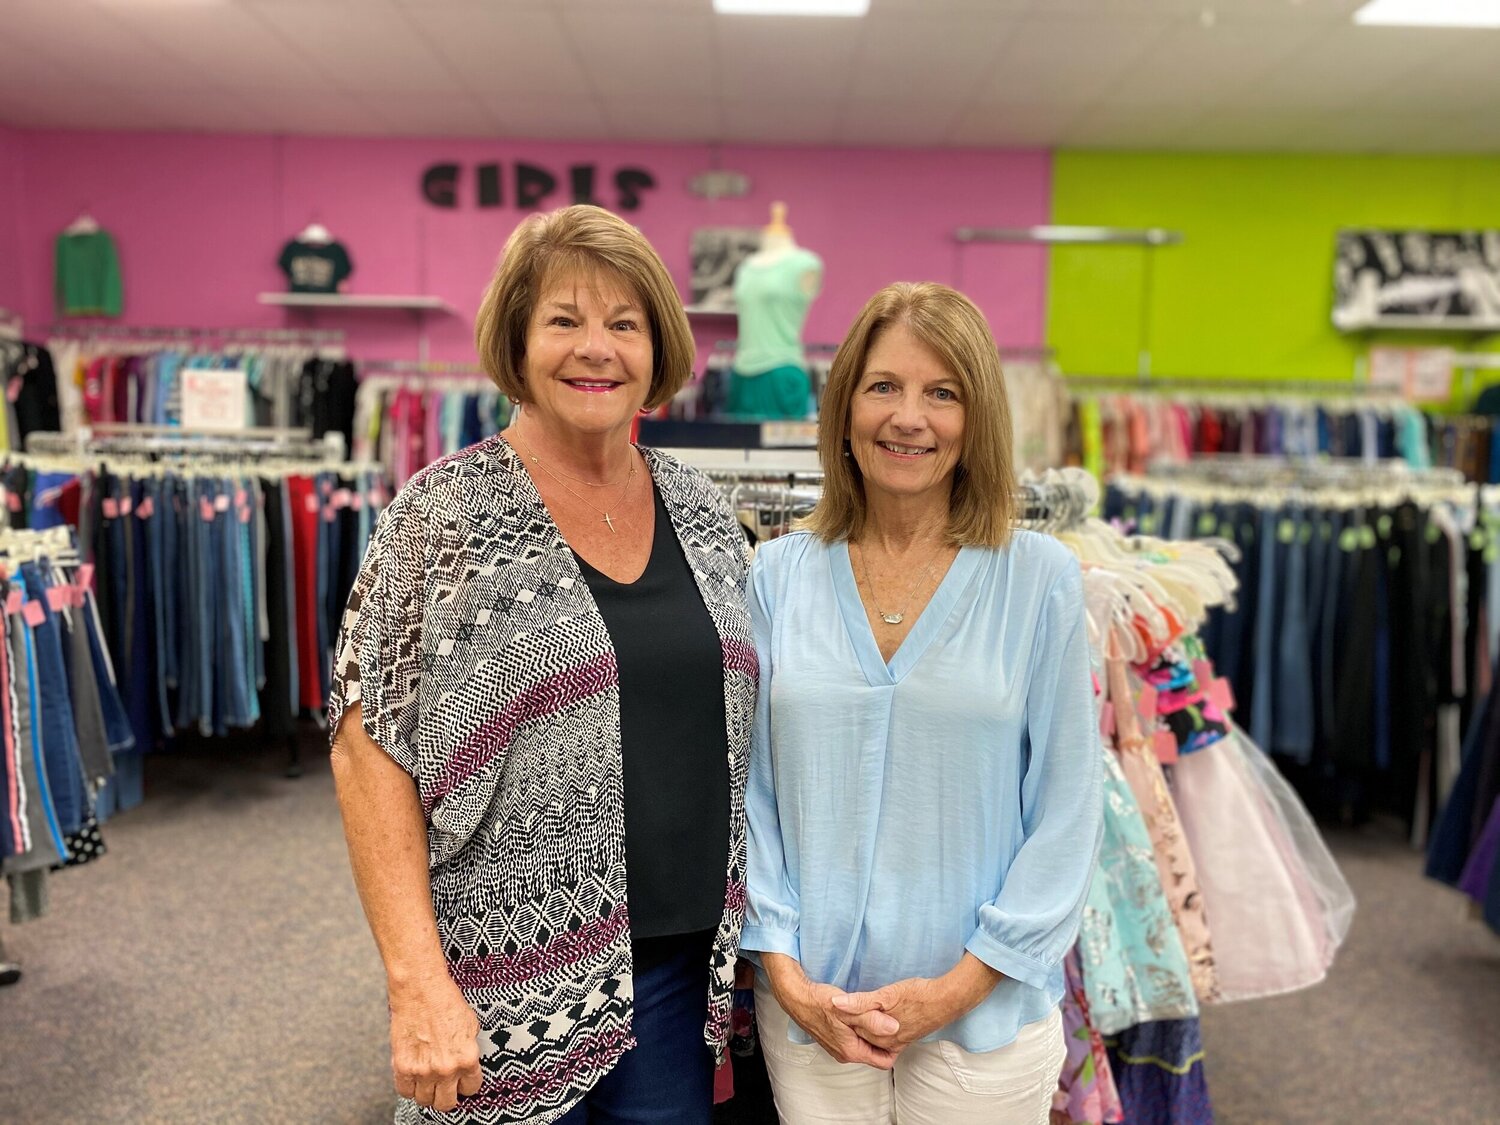 Children in need to receive new clothes at Clothing Center